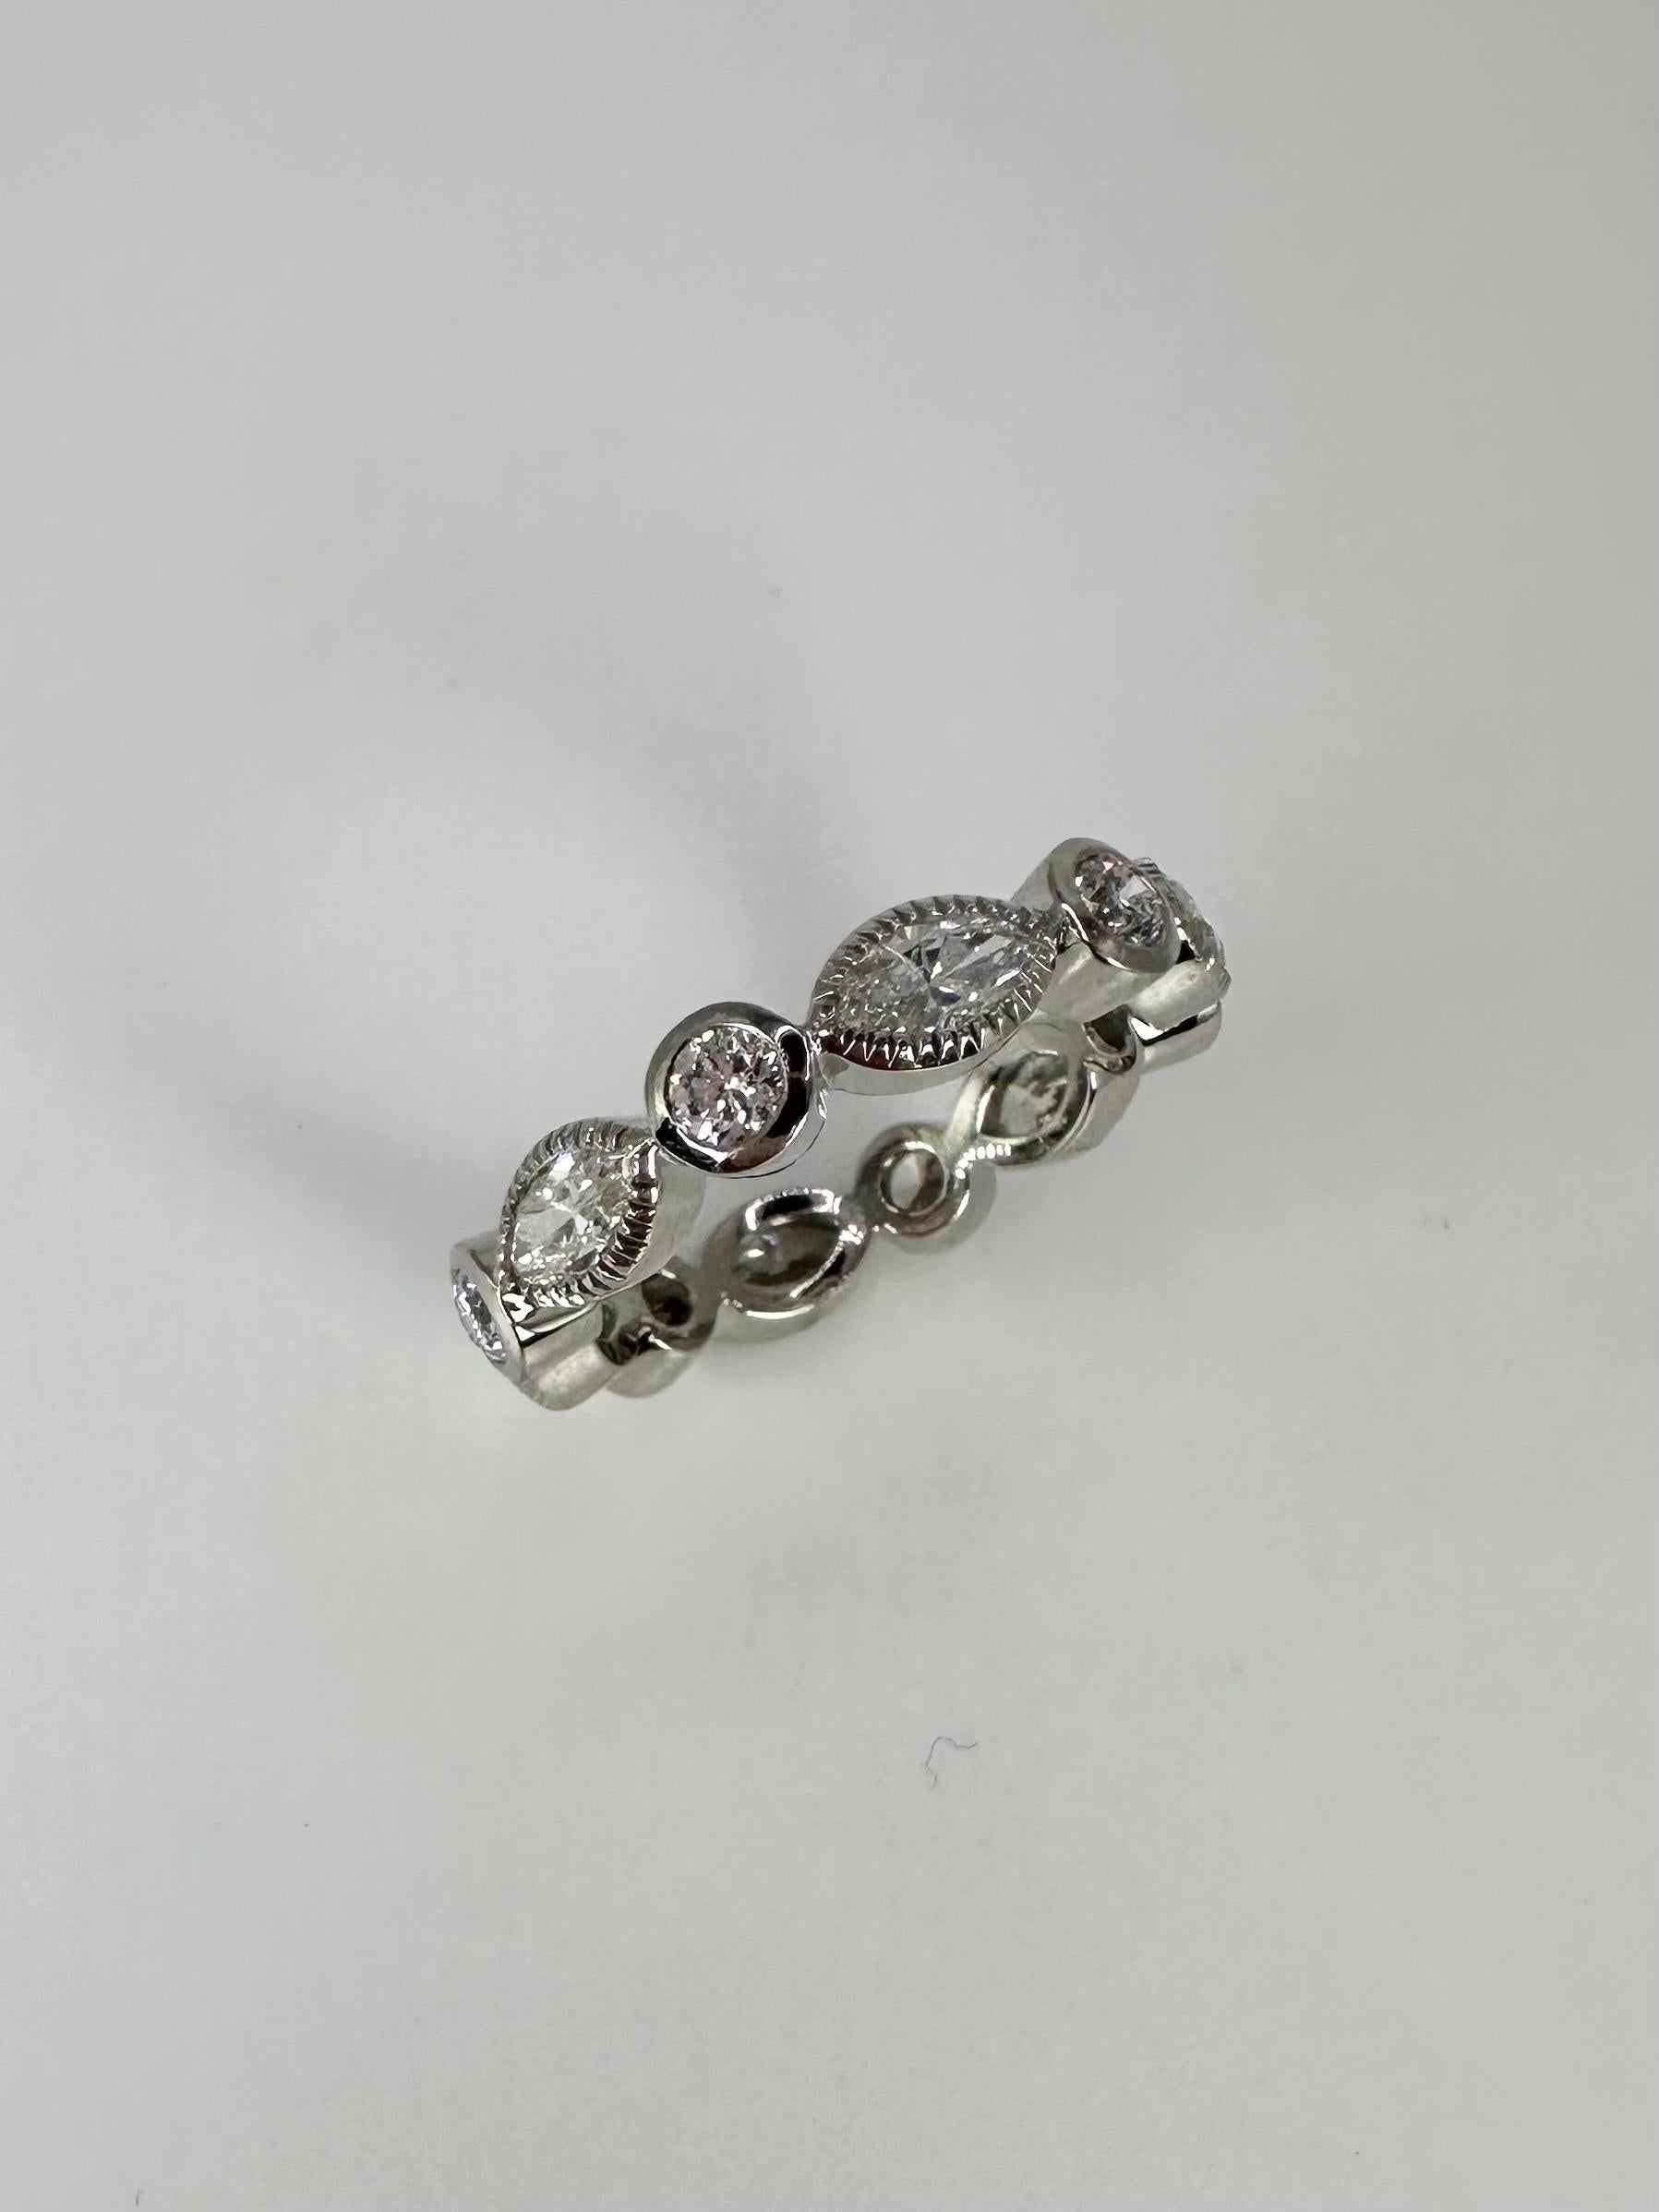 Marquise Diamond Eternity Ring Platinum Diamond Ring 1.7ct of Diamonds Large In New Condition For Sale In Jupiter, FL